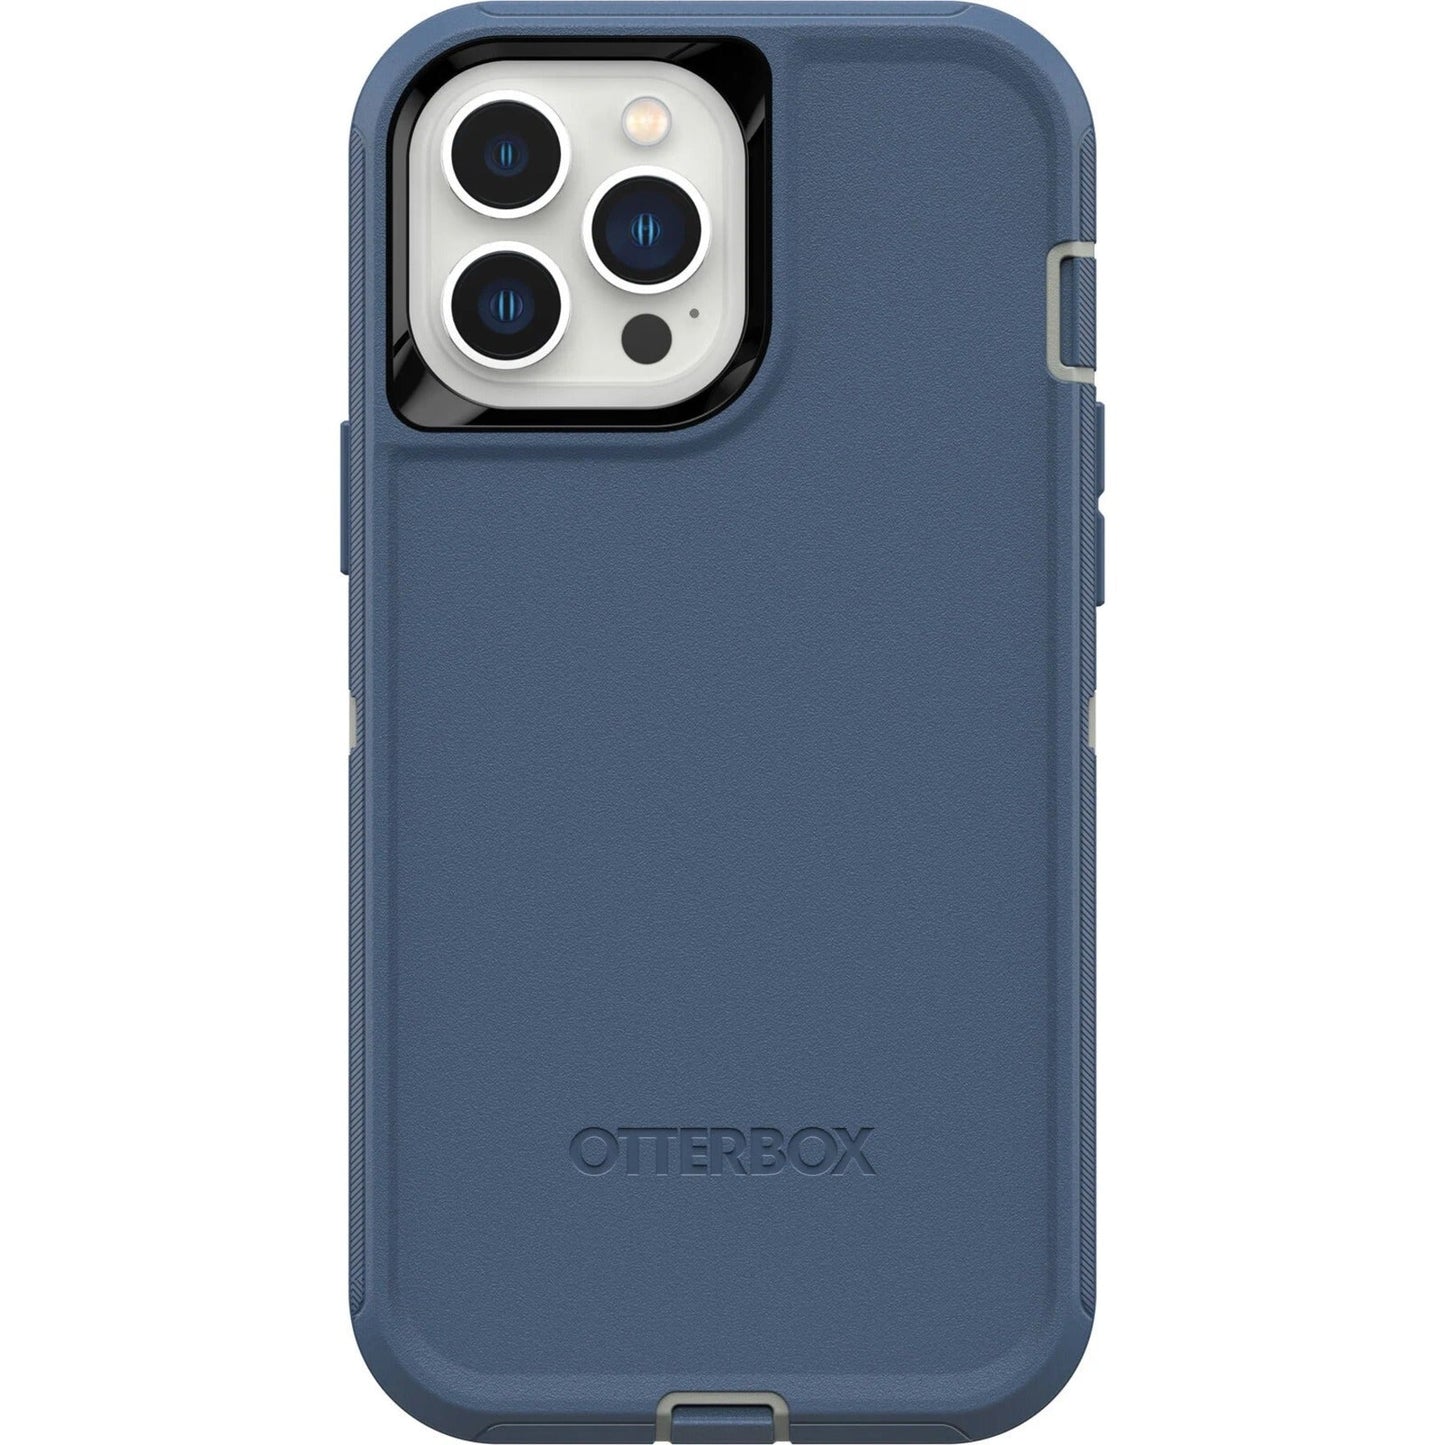 OtterBox Defender Rugged Carrying Case (Holster) Apple iPhone 13 Pro Max iPhone 12 Pro Max Smartphone - Fort Blue